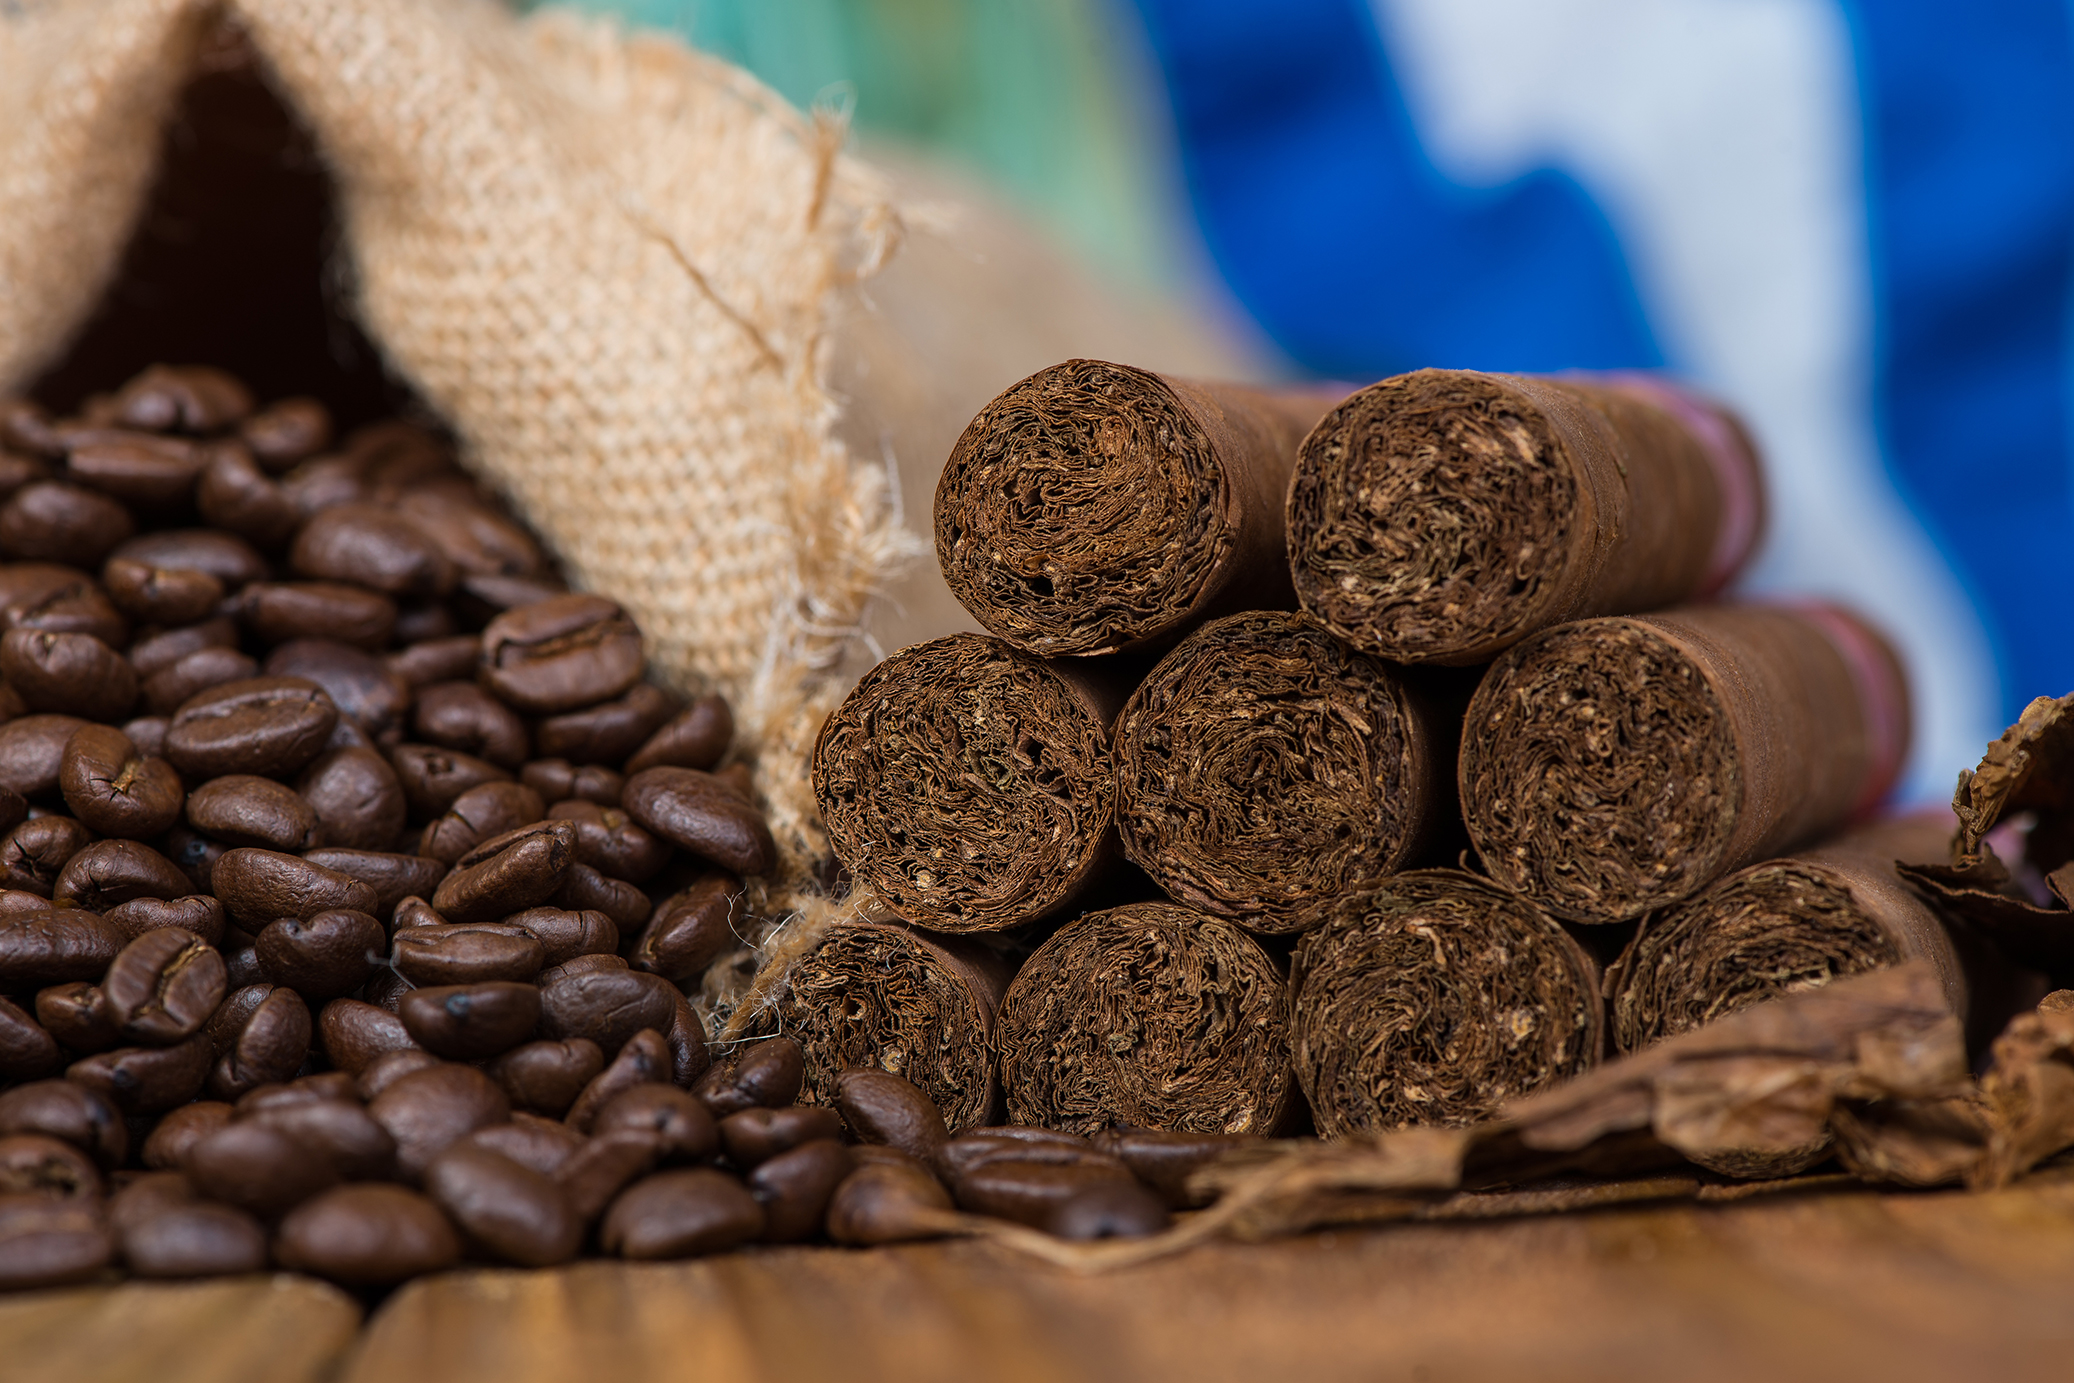 How to make your own, homemade, coffee infused premium cigars ...